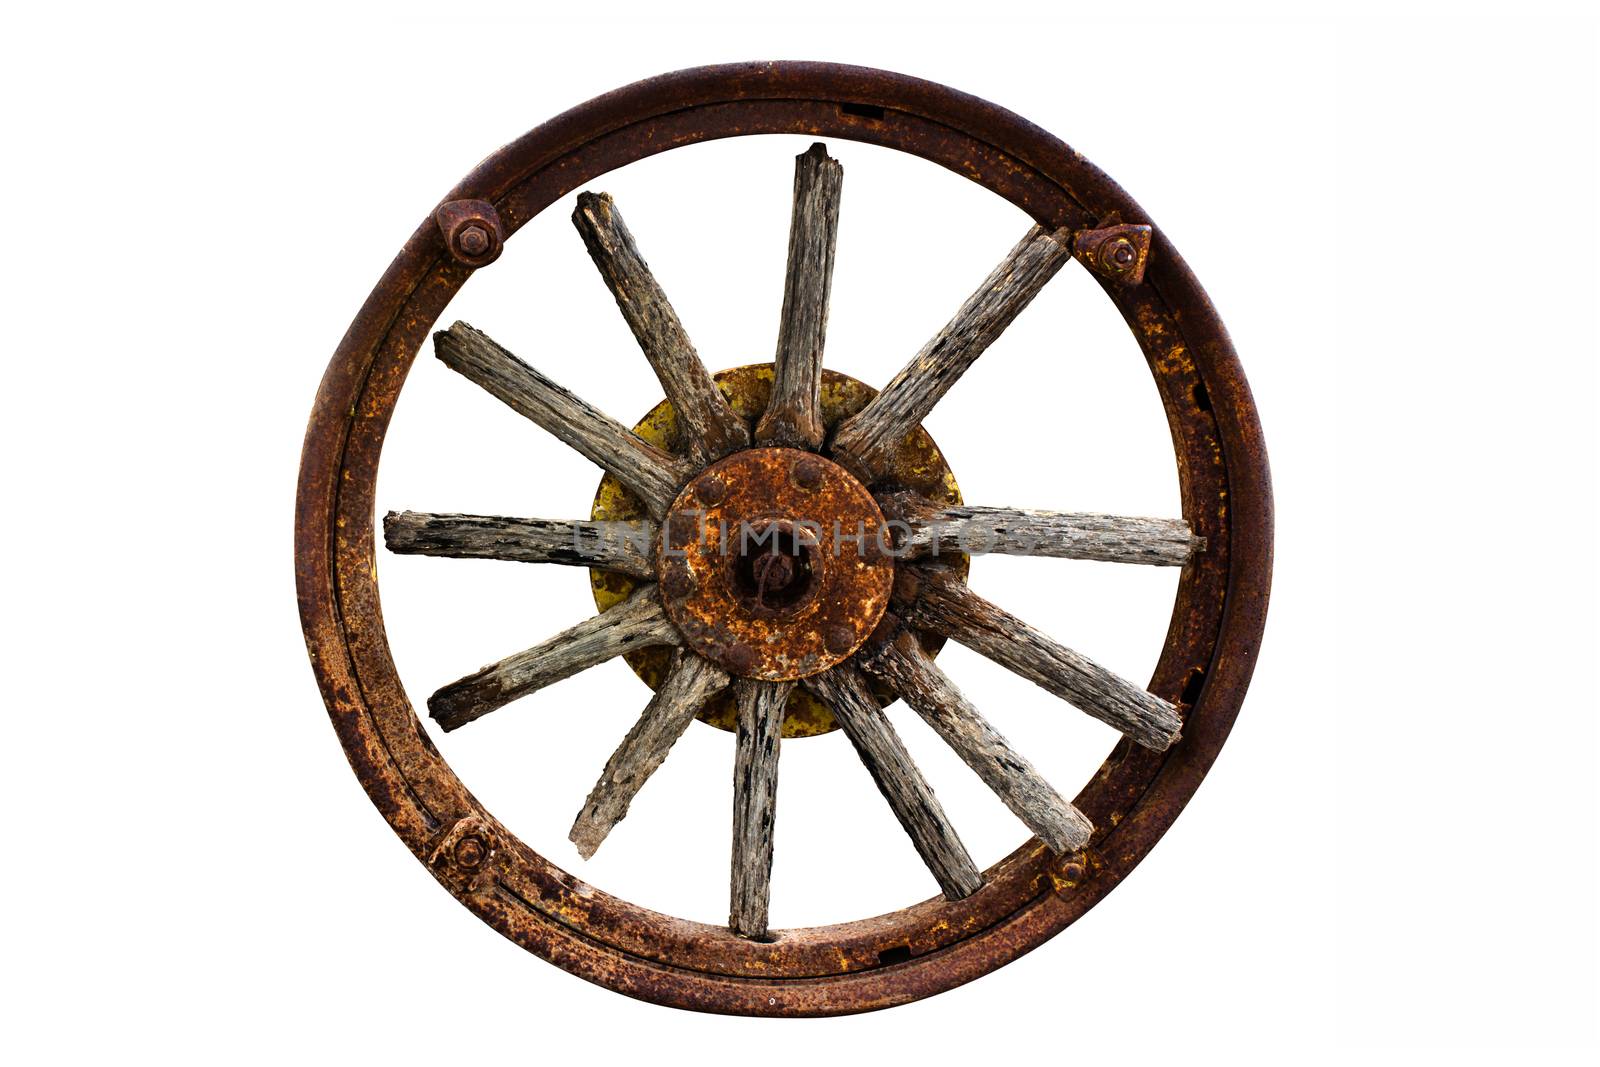 Save selection to Clipping path Cart Wheel made of wood isolated background 